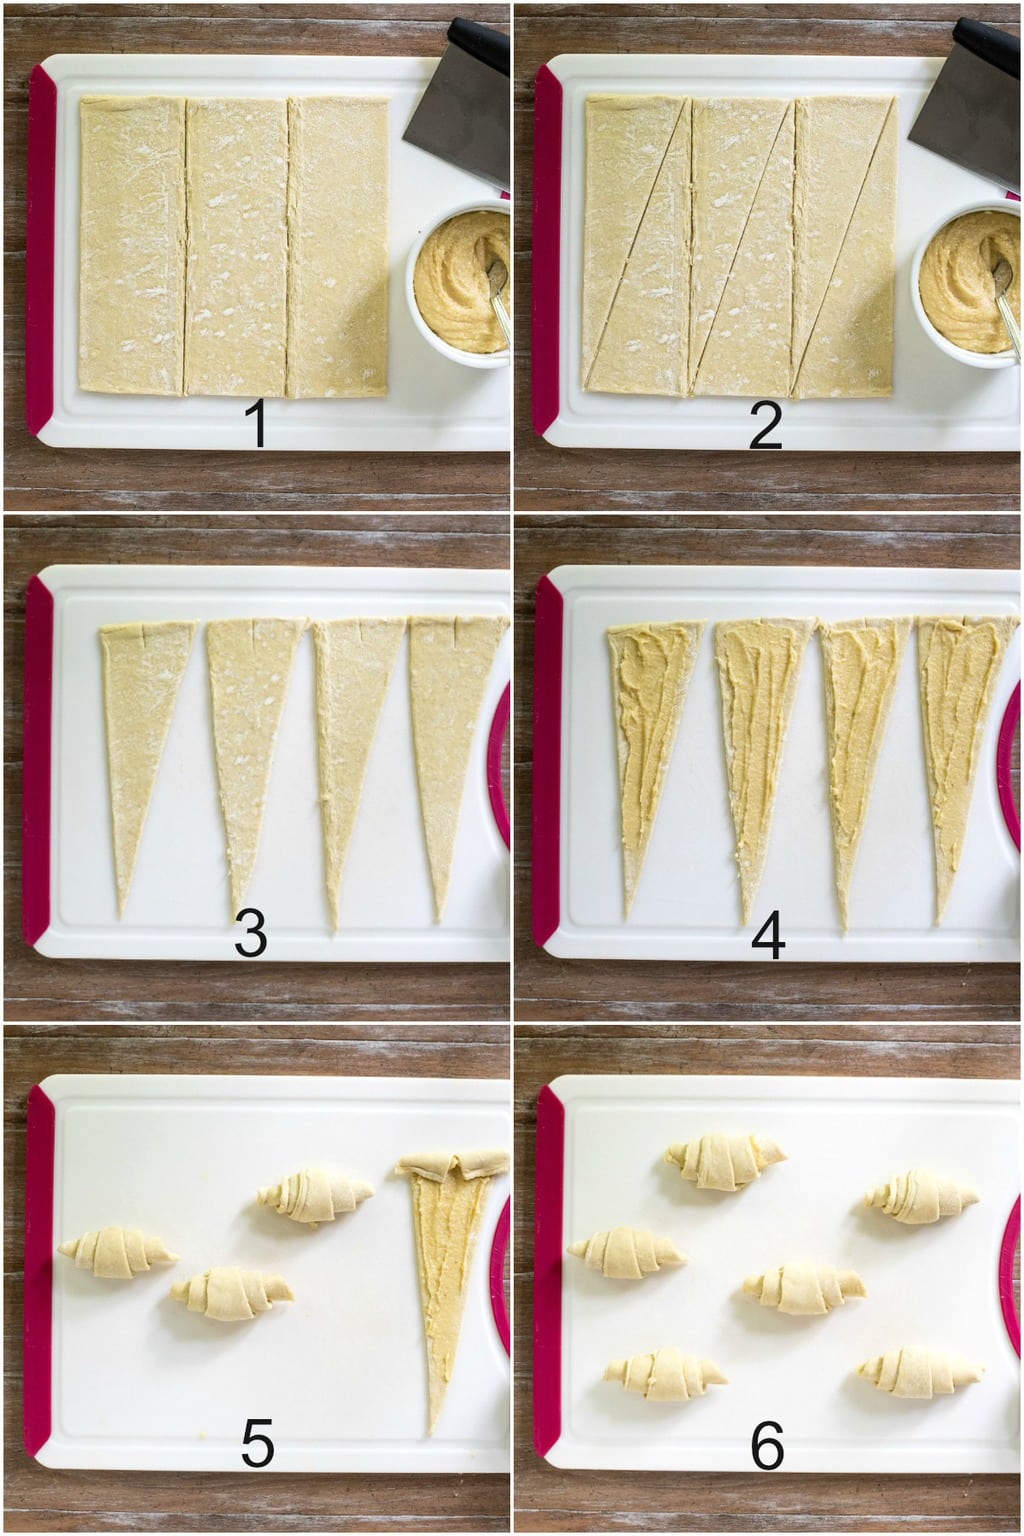 Vertical photo collage of six process shots demonstrating how to cut, fill and roll up Ridiculously Easy Almond Croissants on a cutting board.